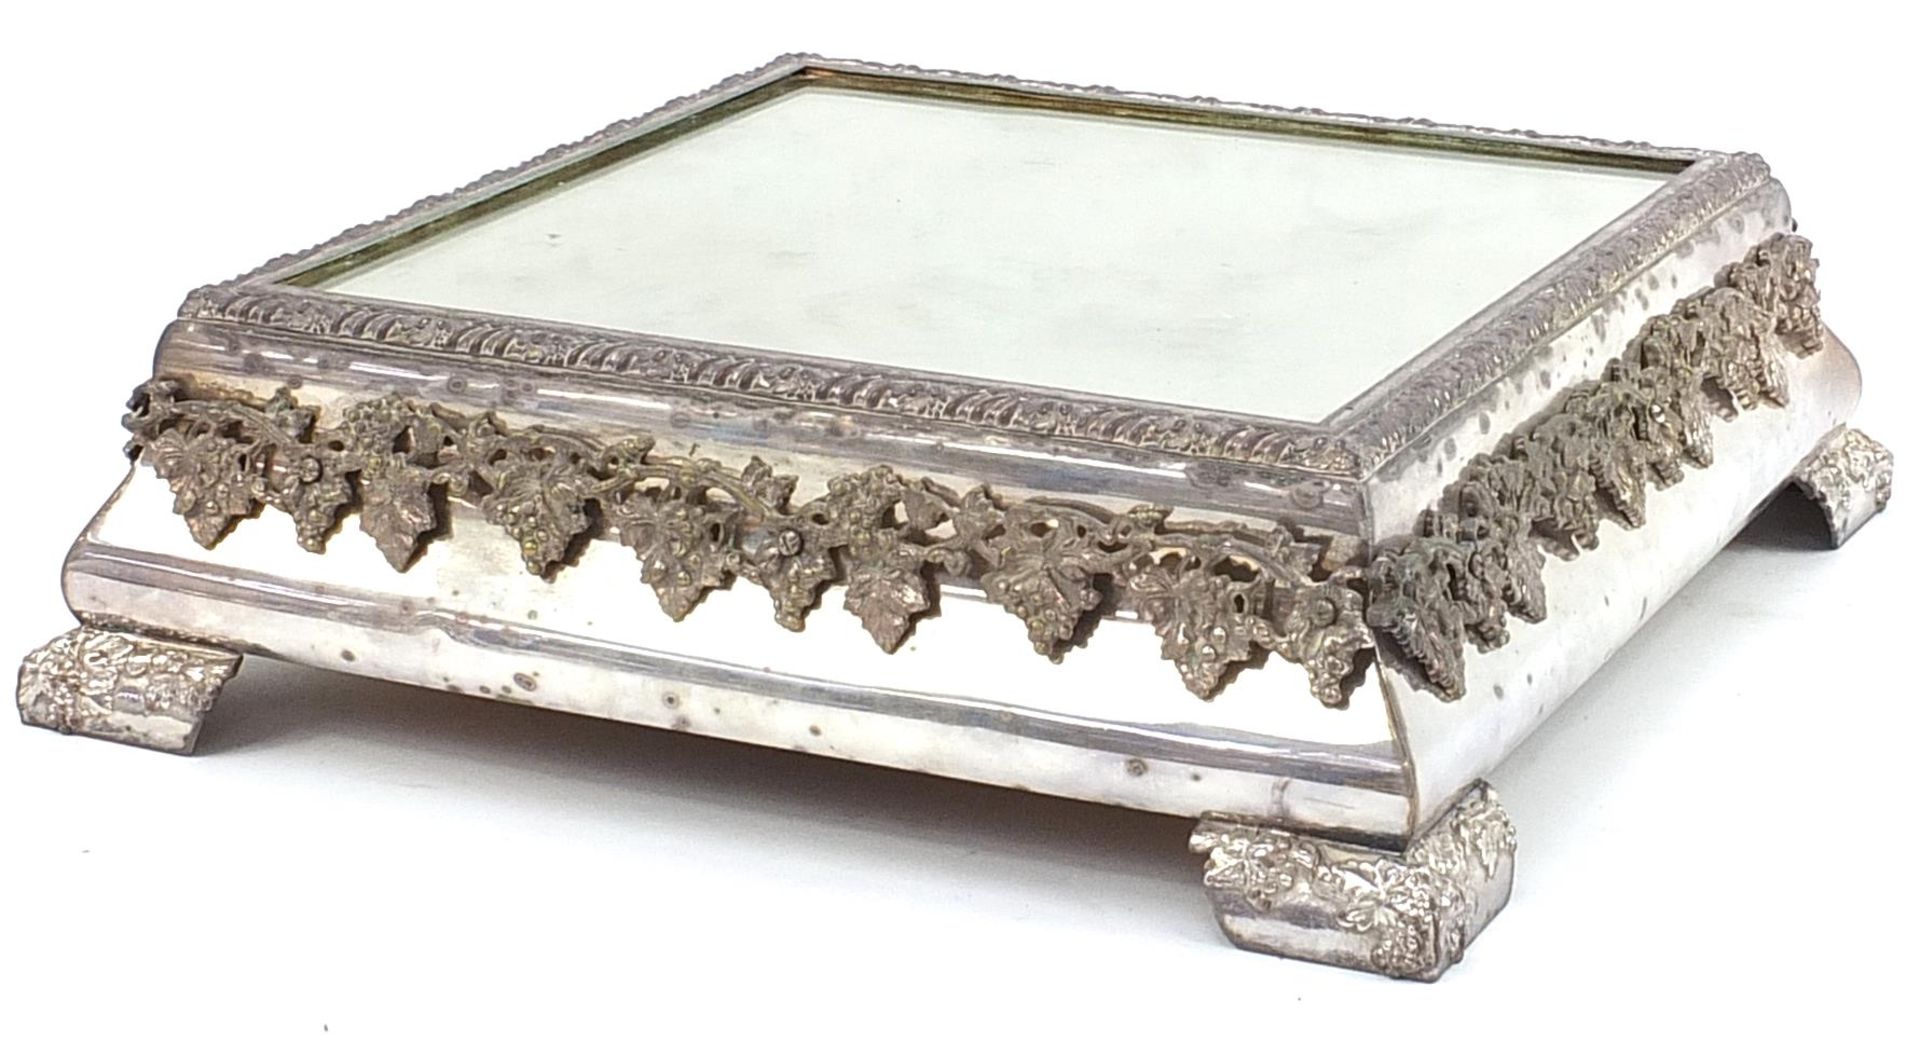 Square silver plated mirrored cake stand relief decorated with grapes on a vine, housed in a painted